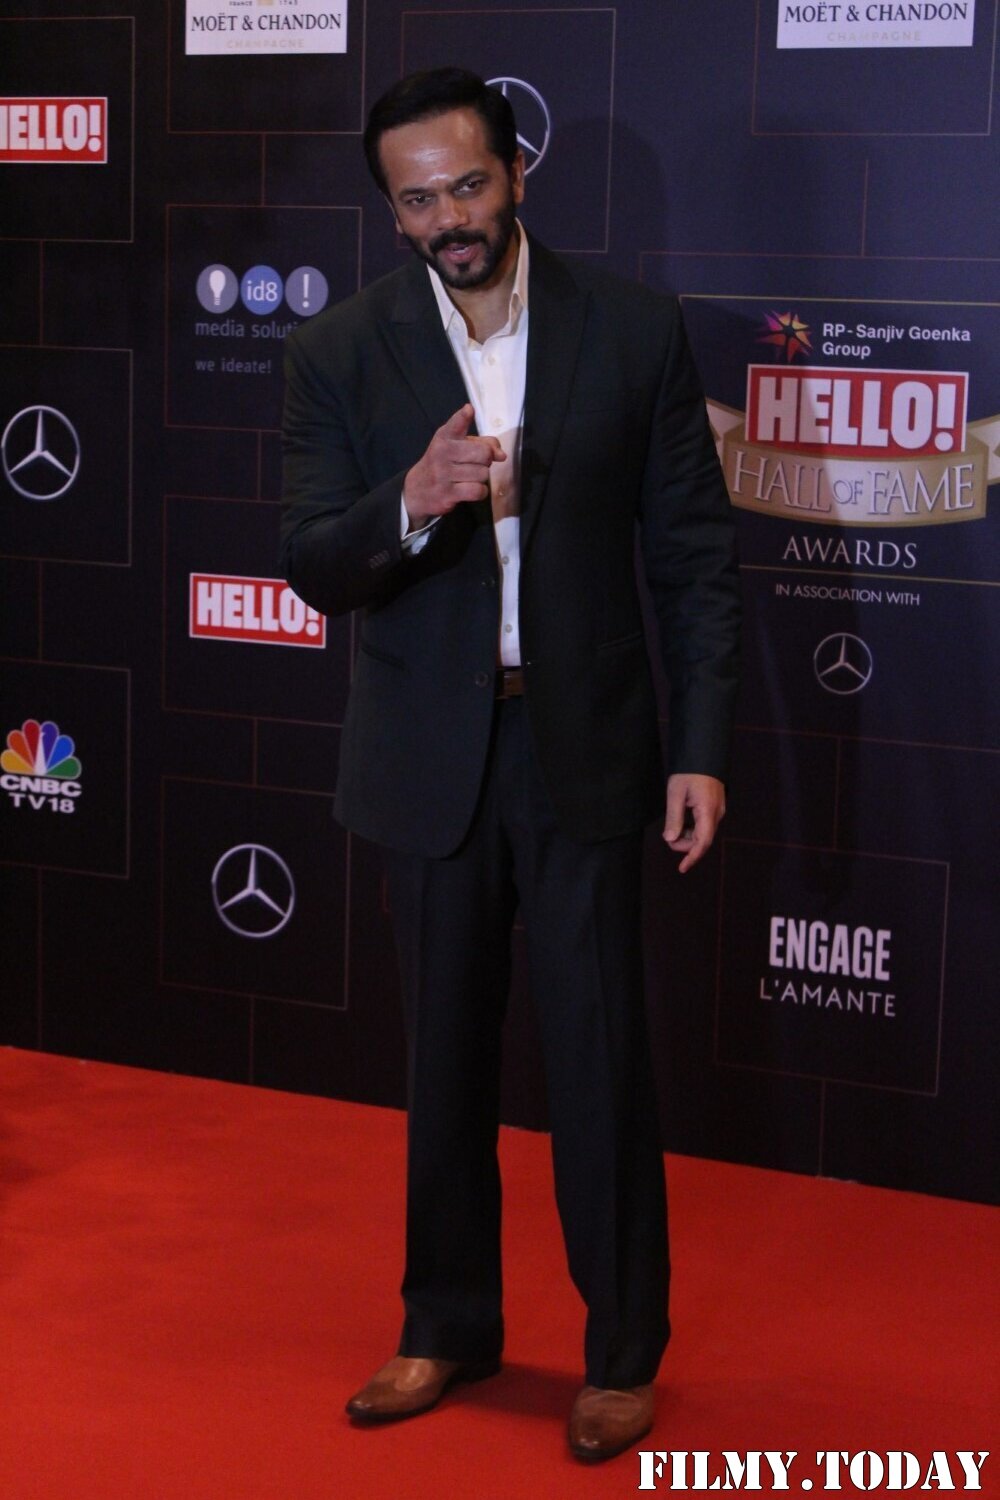 Rohit Shetty - Photos: Hello! Hall Of Fame Awards 2022 | Picture 1866755